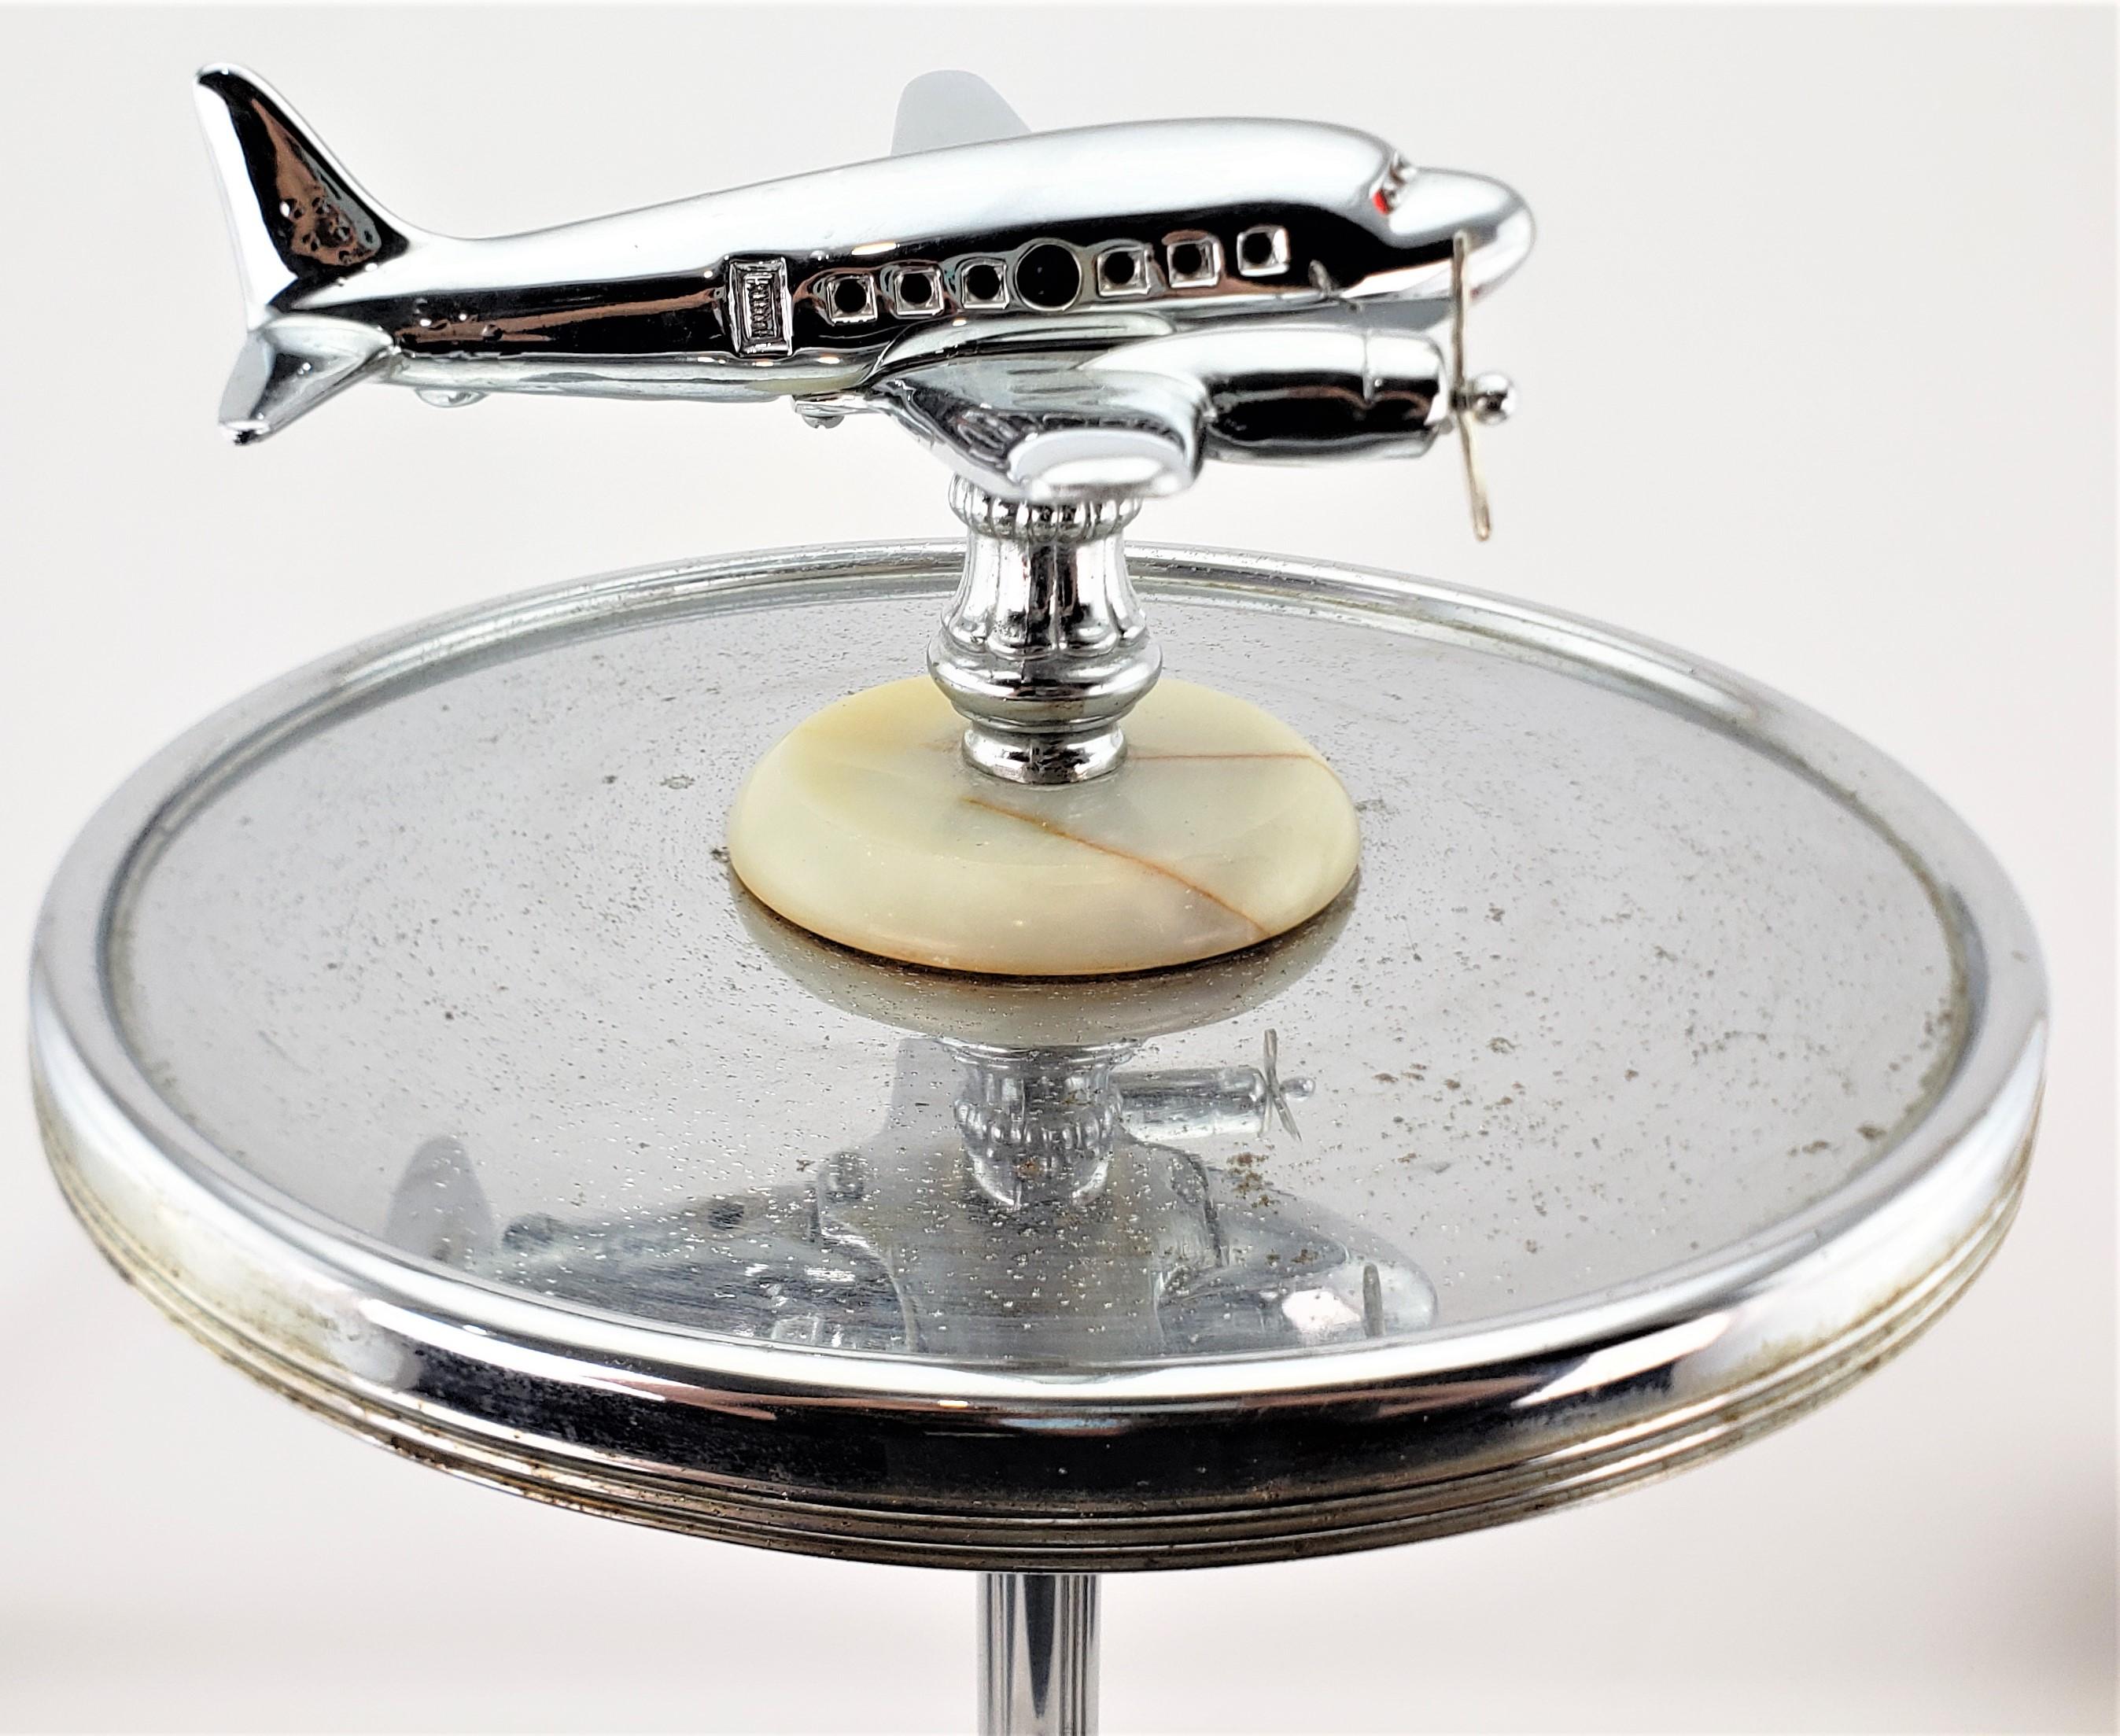 Cast Art Deco Styled Chrome Lighted Airplane Smoker's Ashtray Stand or Accent Table For Sale